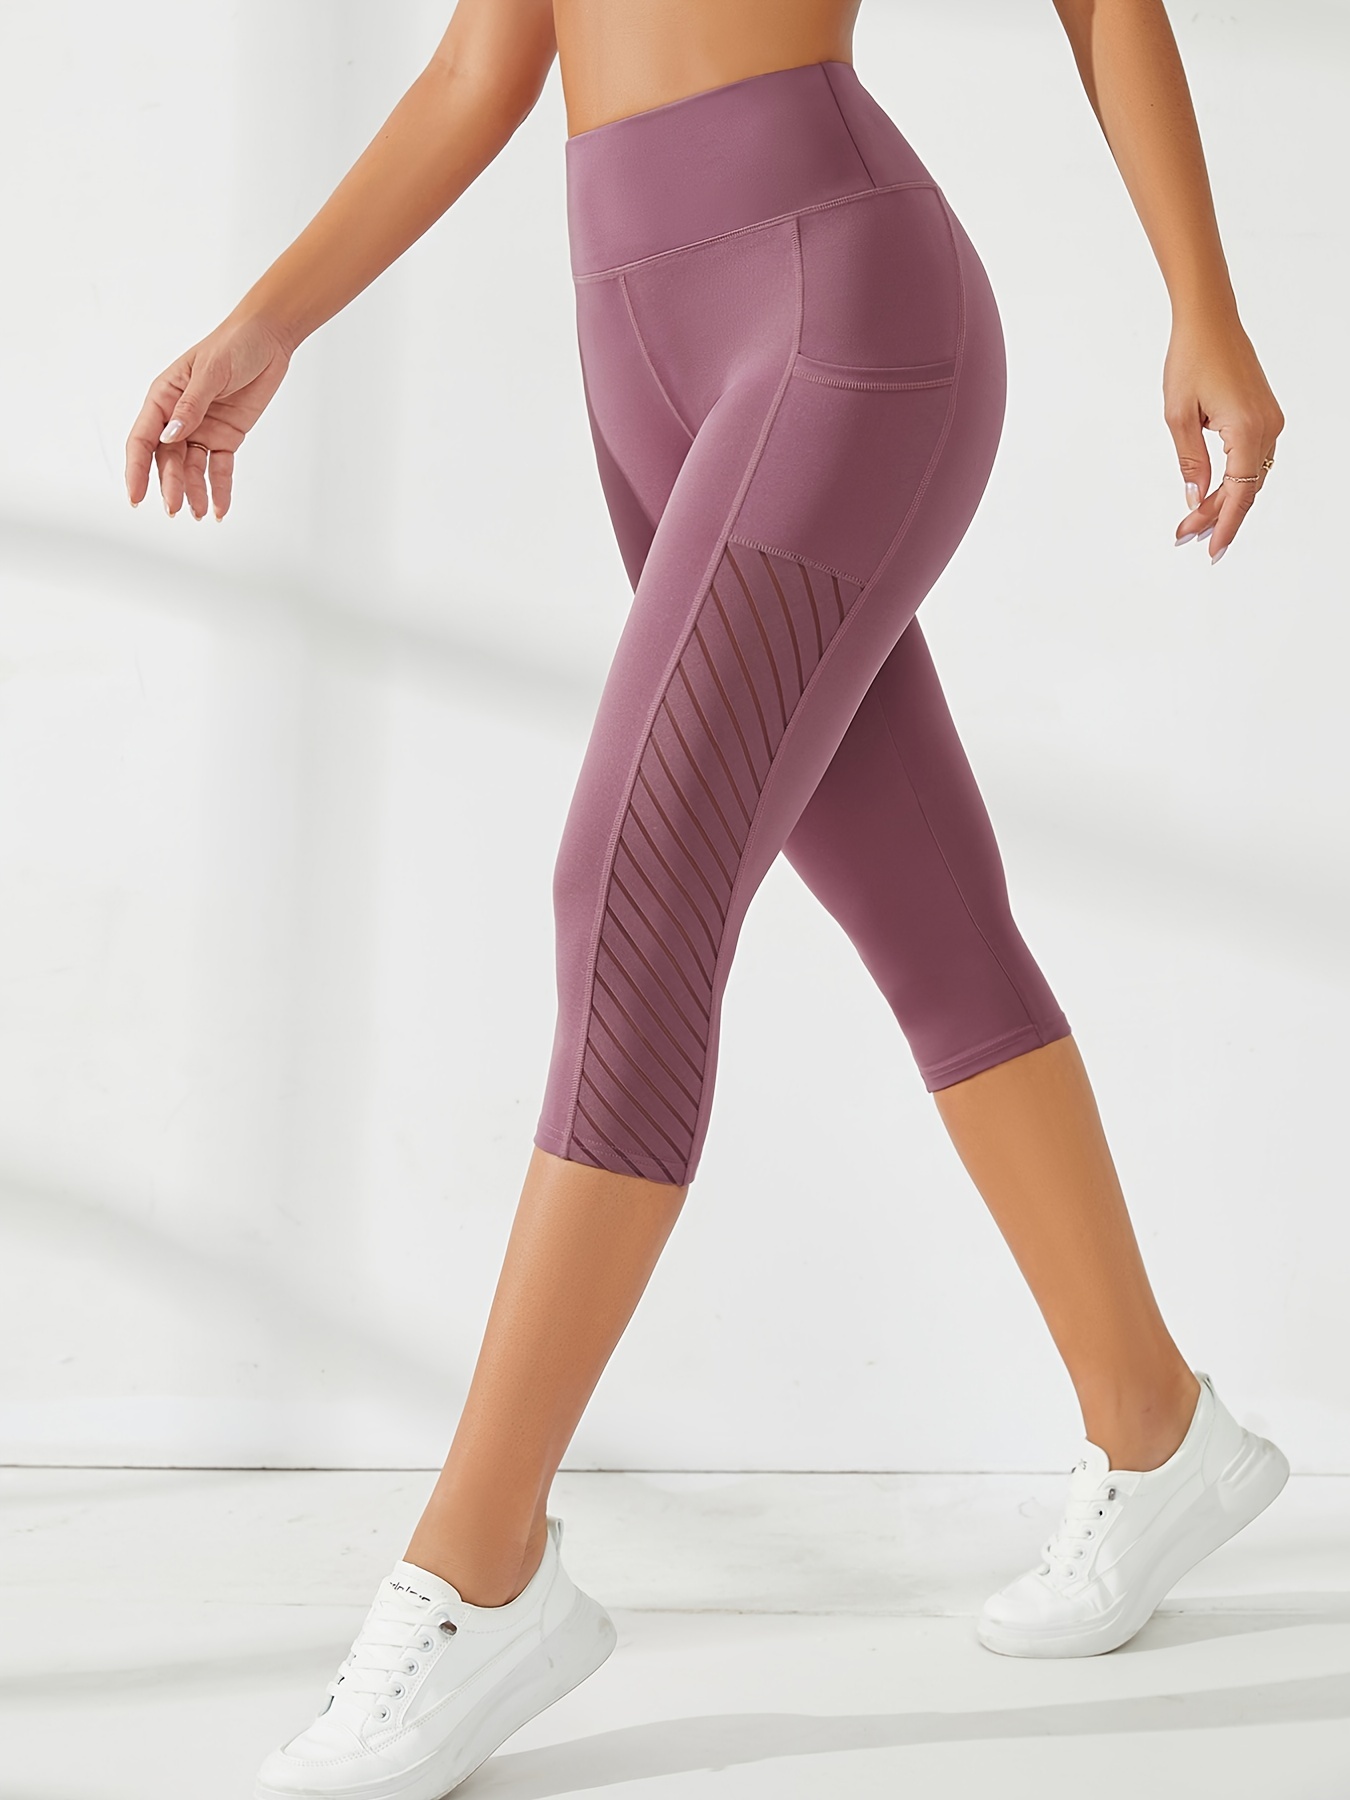 Easter Deals! Yoga Pants Workout Sets For Women Women'S Mesh Stitched  Capris Sports Yoga Stretch Pants Running High Waist Leggings 